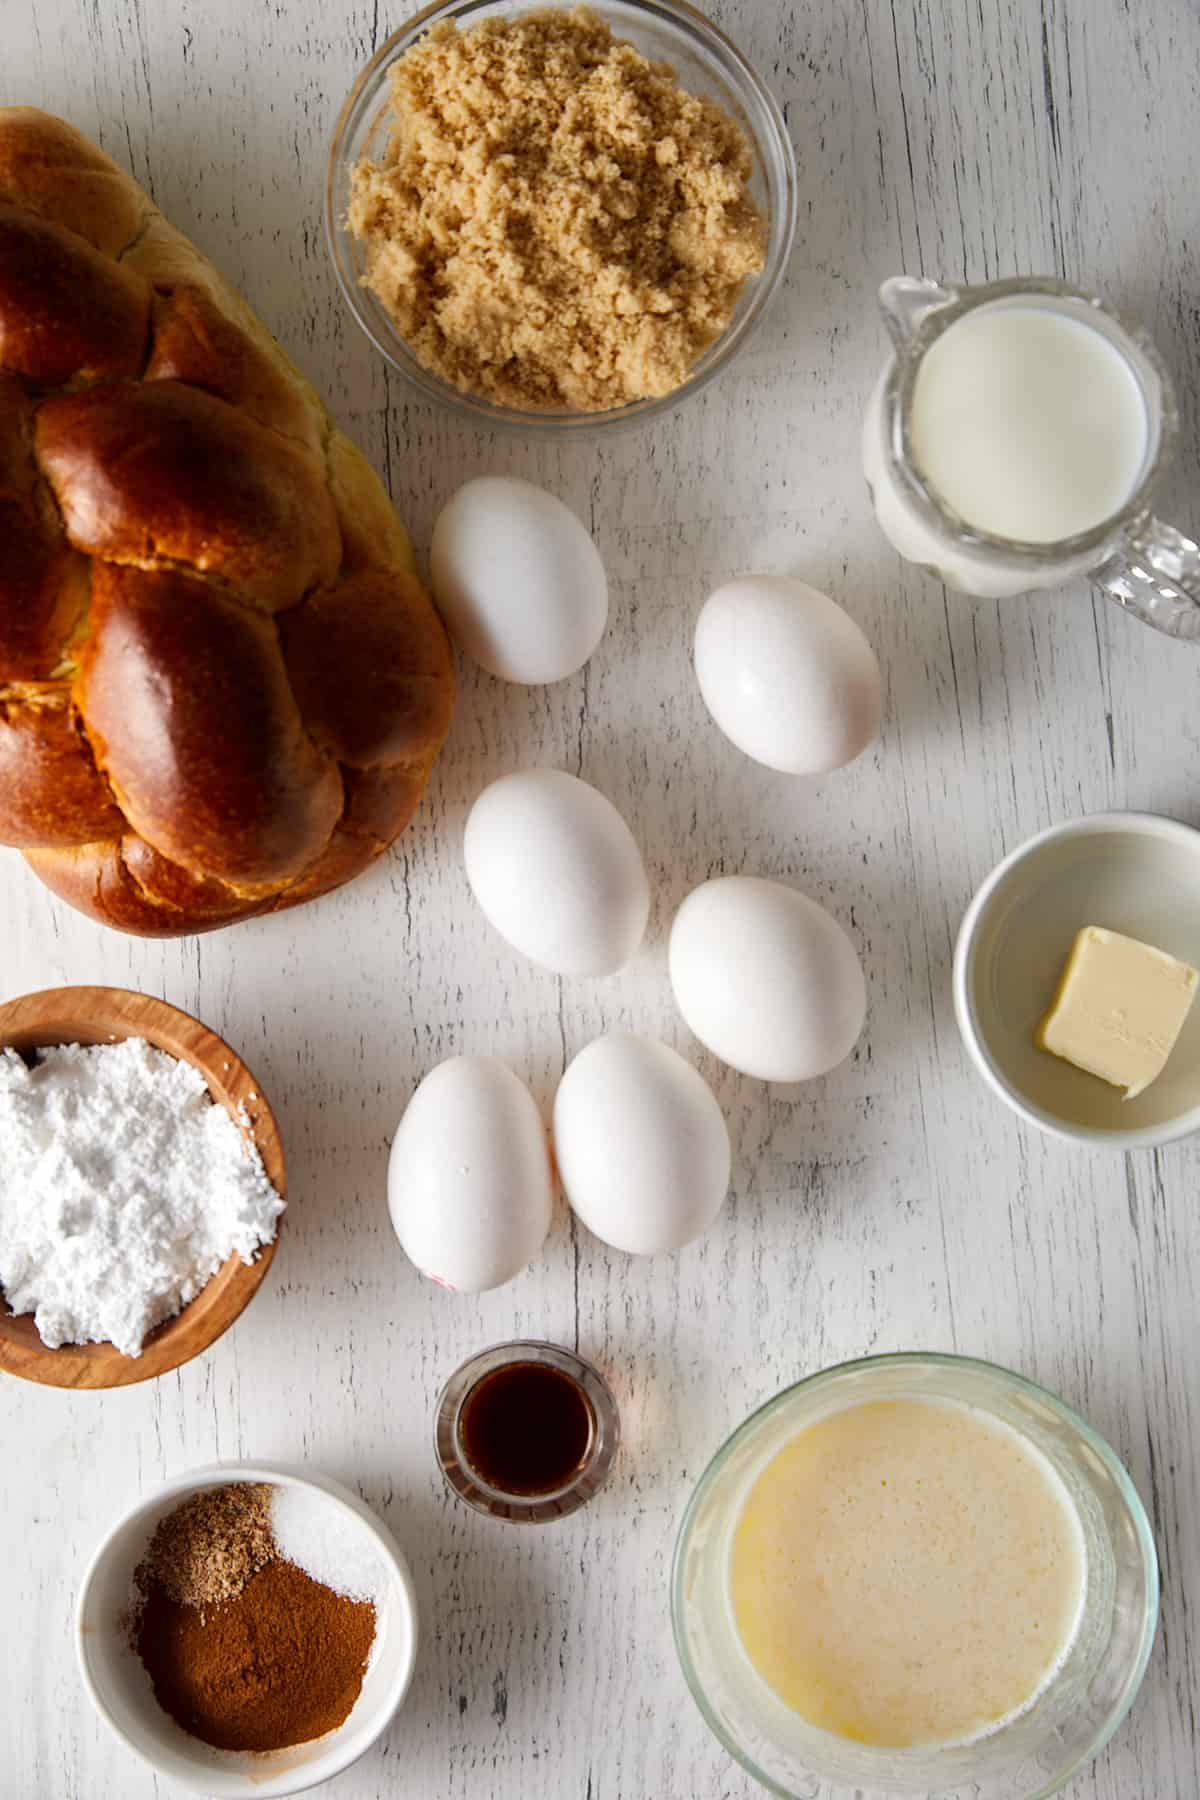 A variety of ingredients including eggs, milk, and cinnamon for the Challah French Toast Casserole.